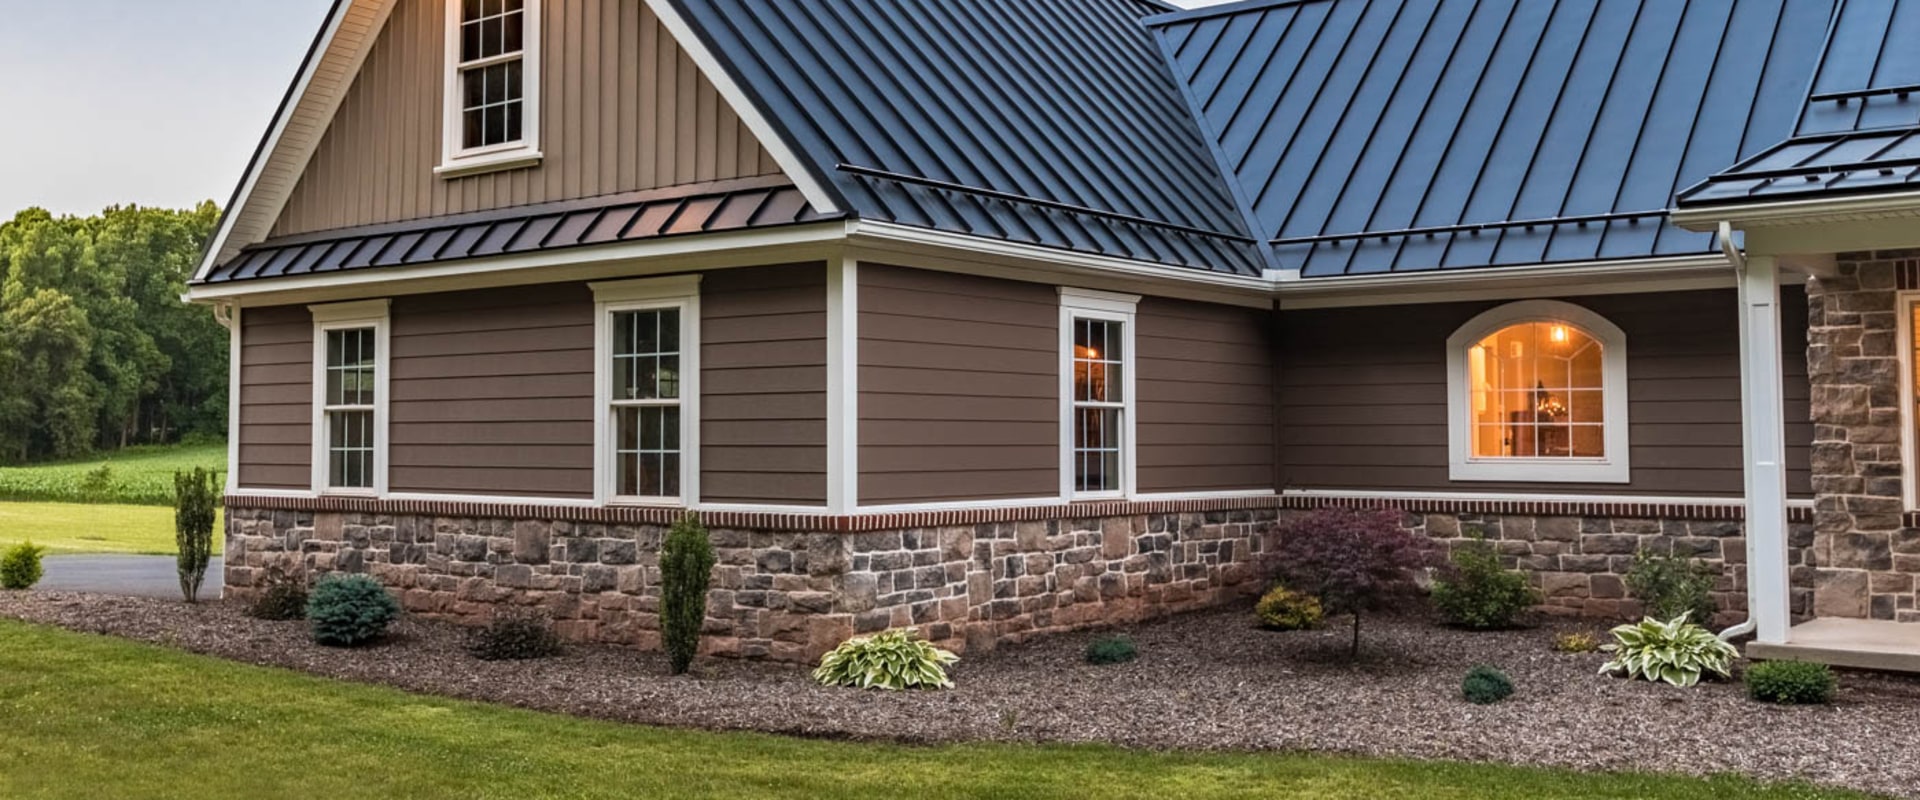 Does a metal roof make your home hotter?